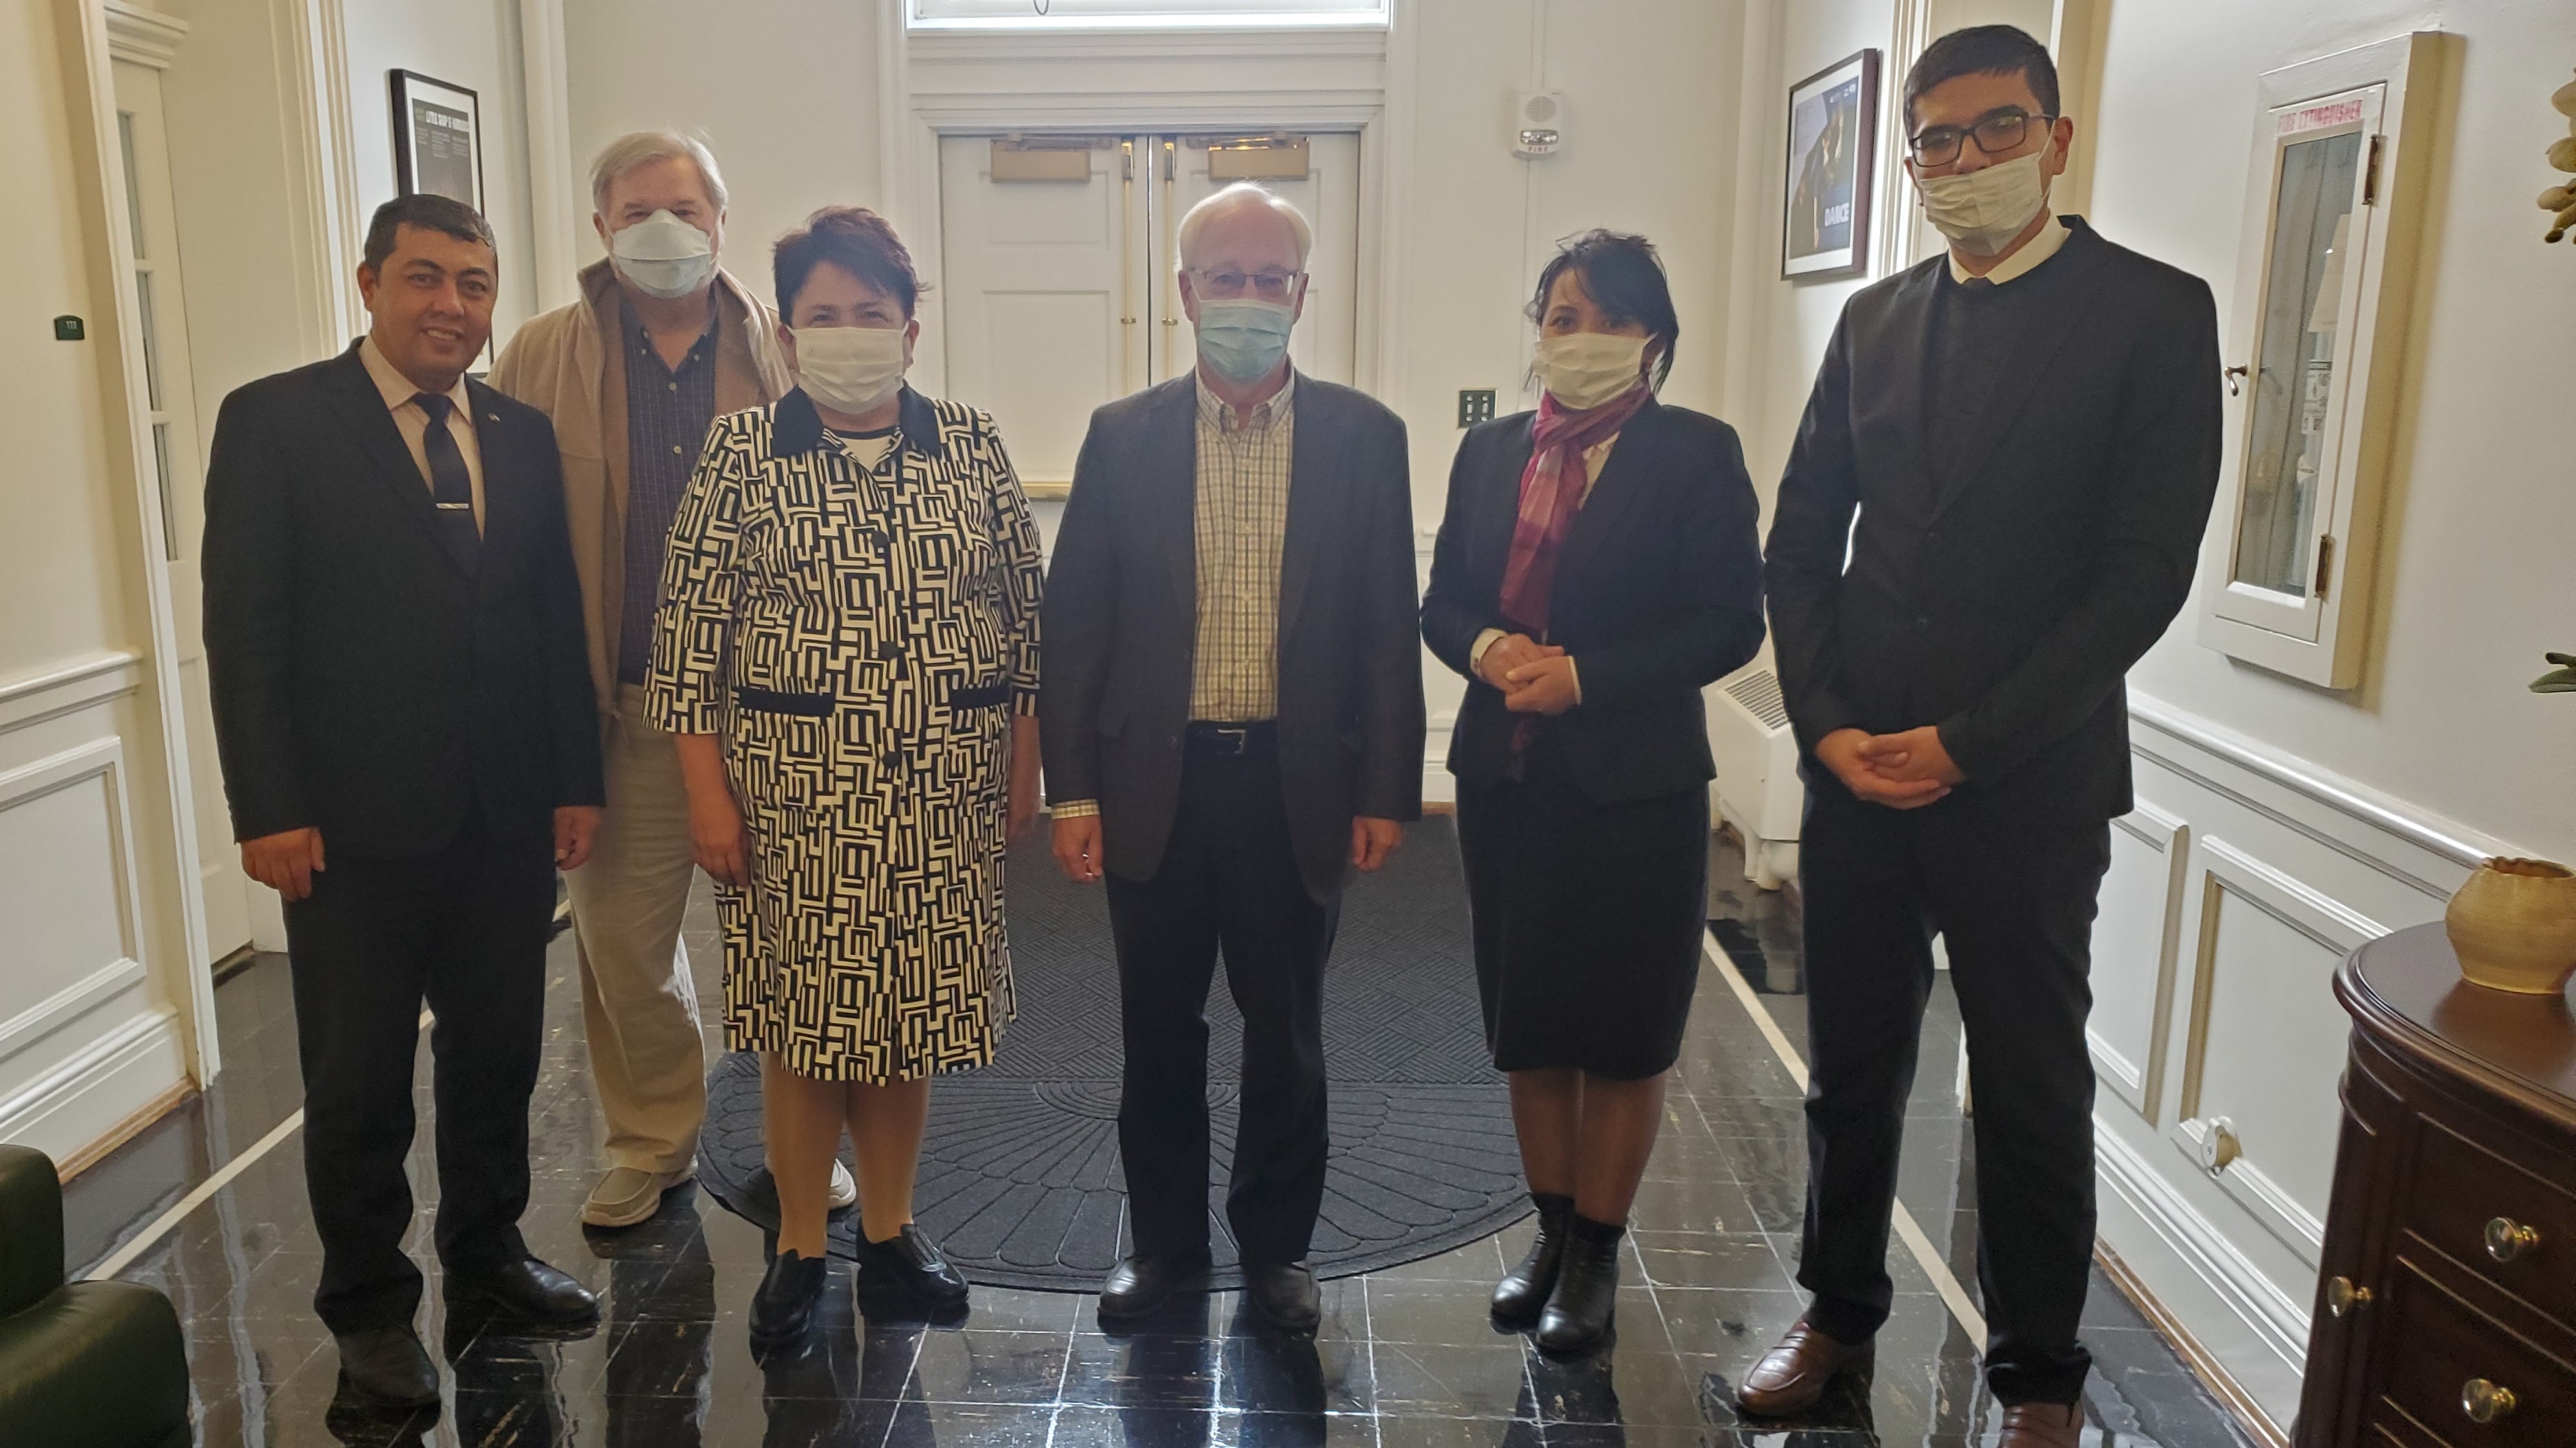 Six people stand together in a hallway with masks on for a picture